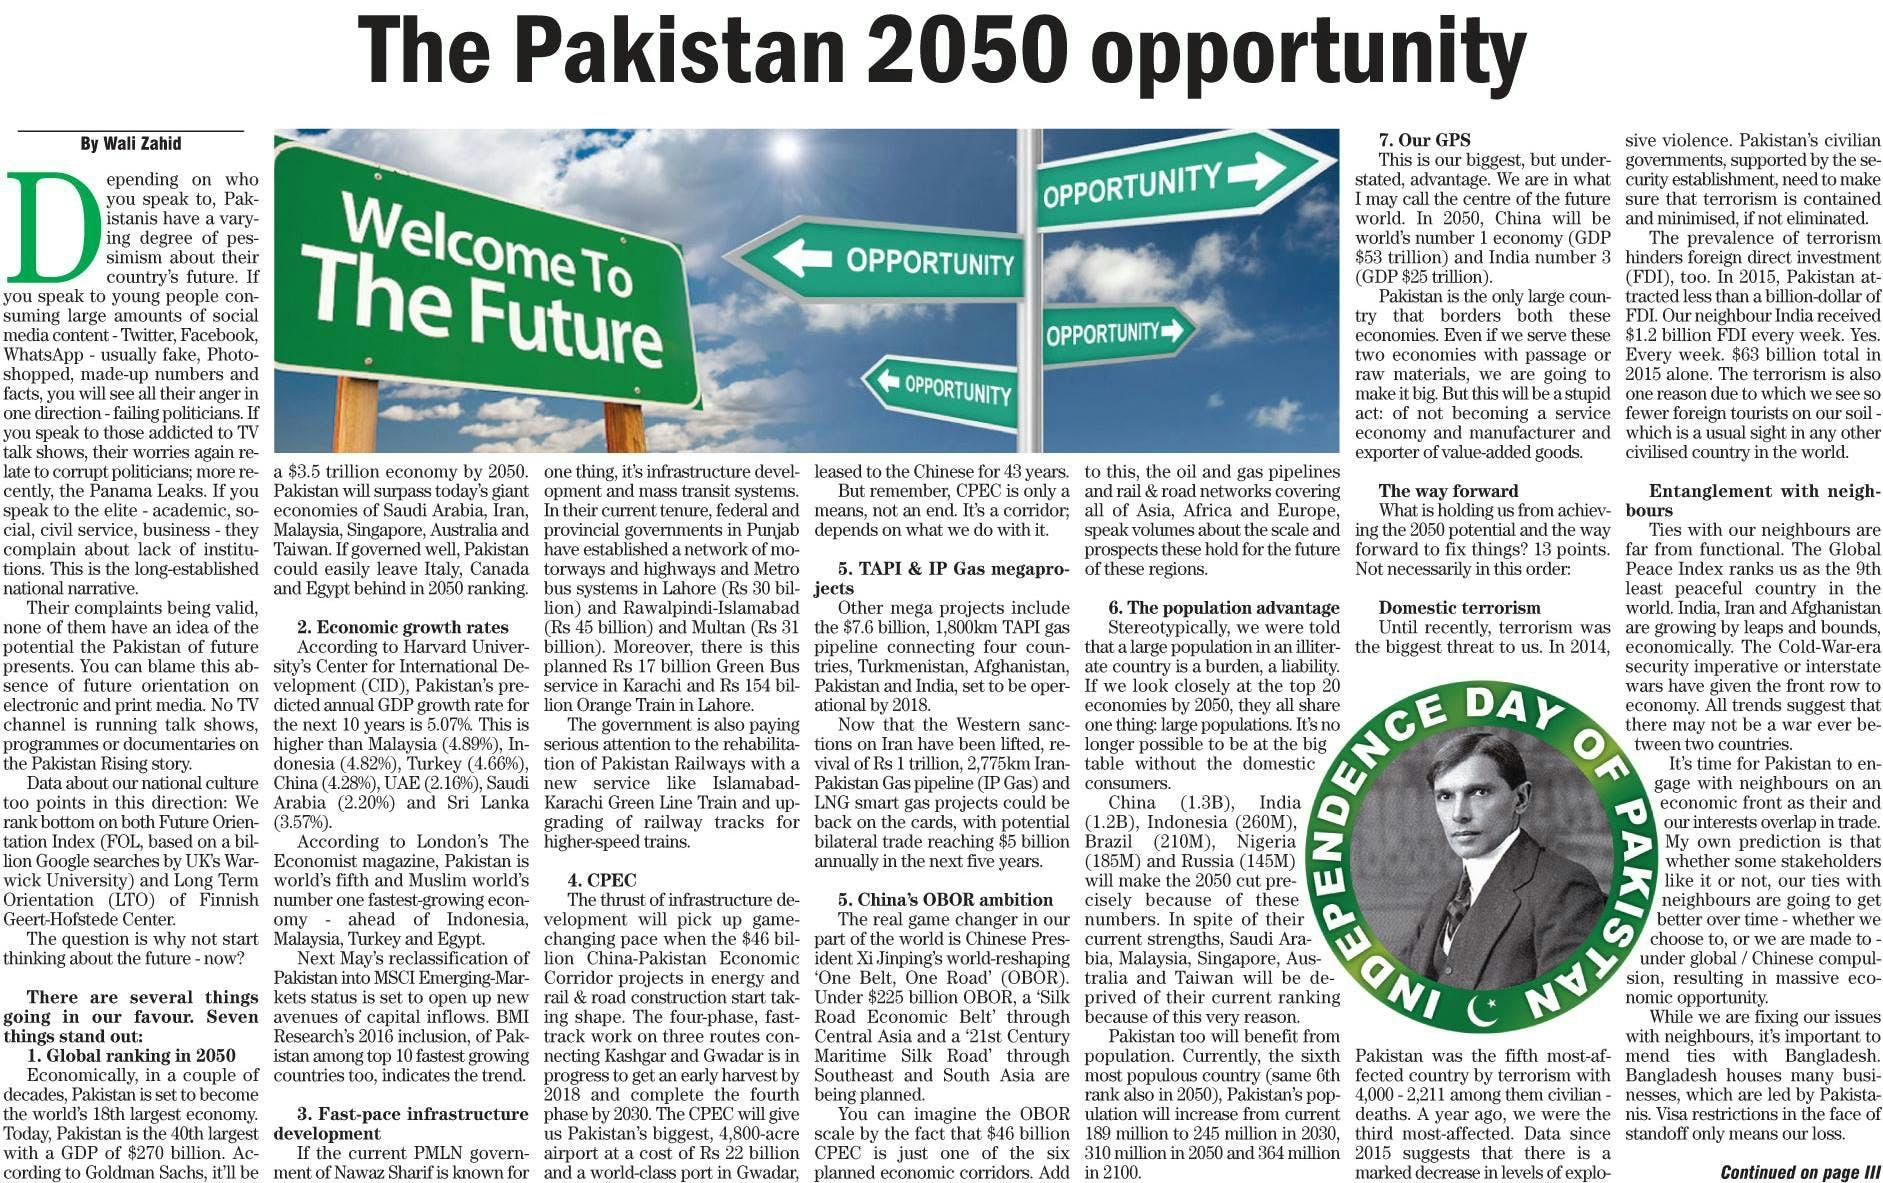 Back to the future: Pakistan in 2050